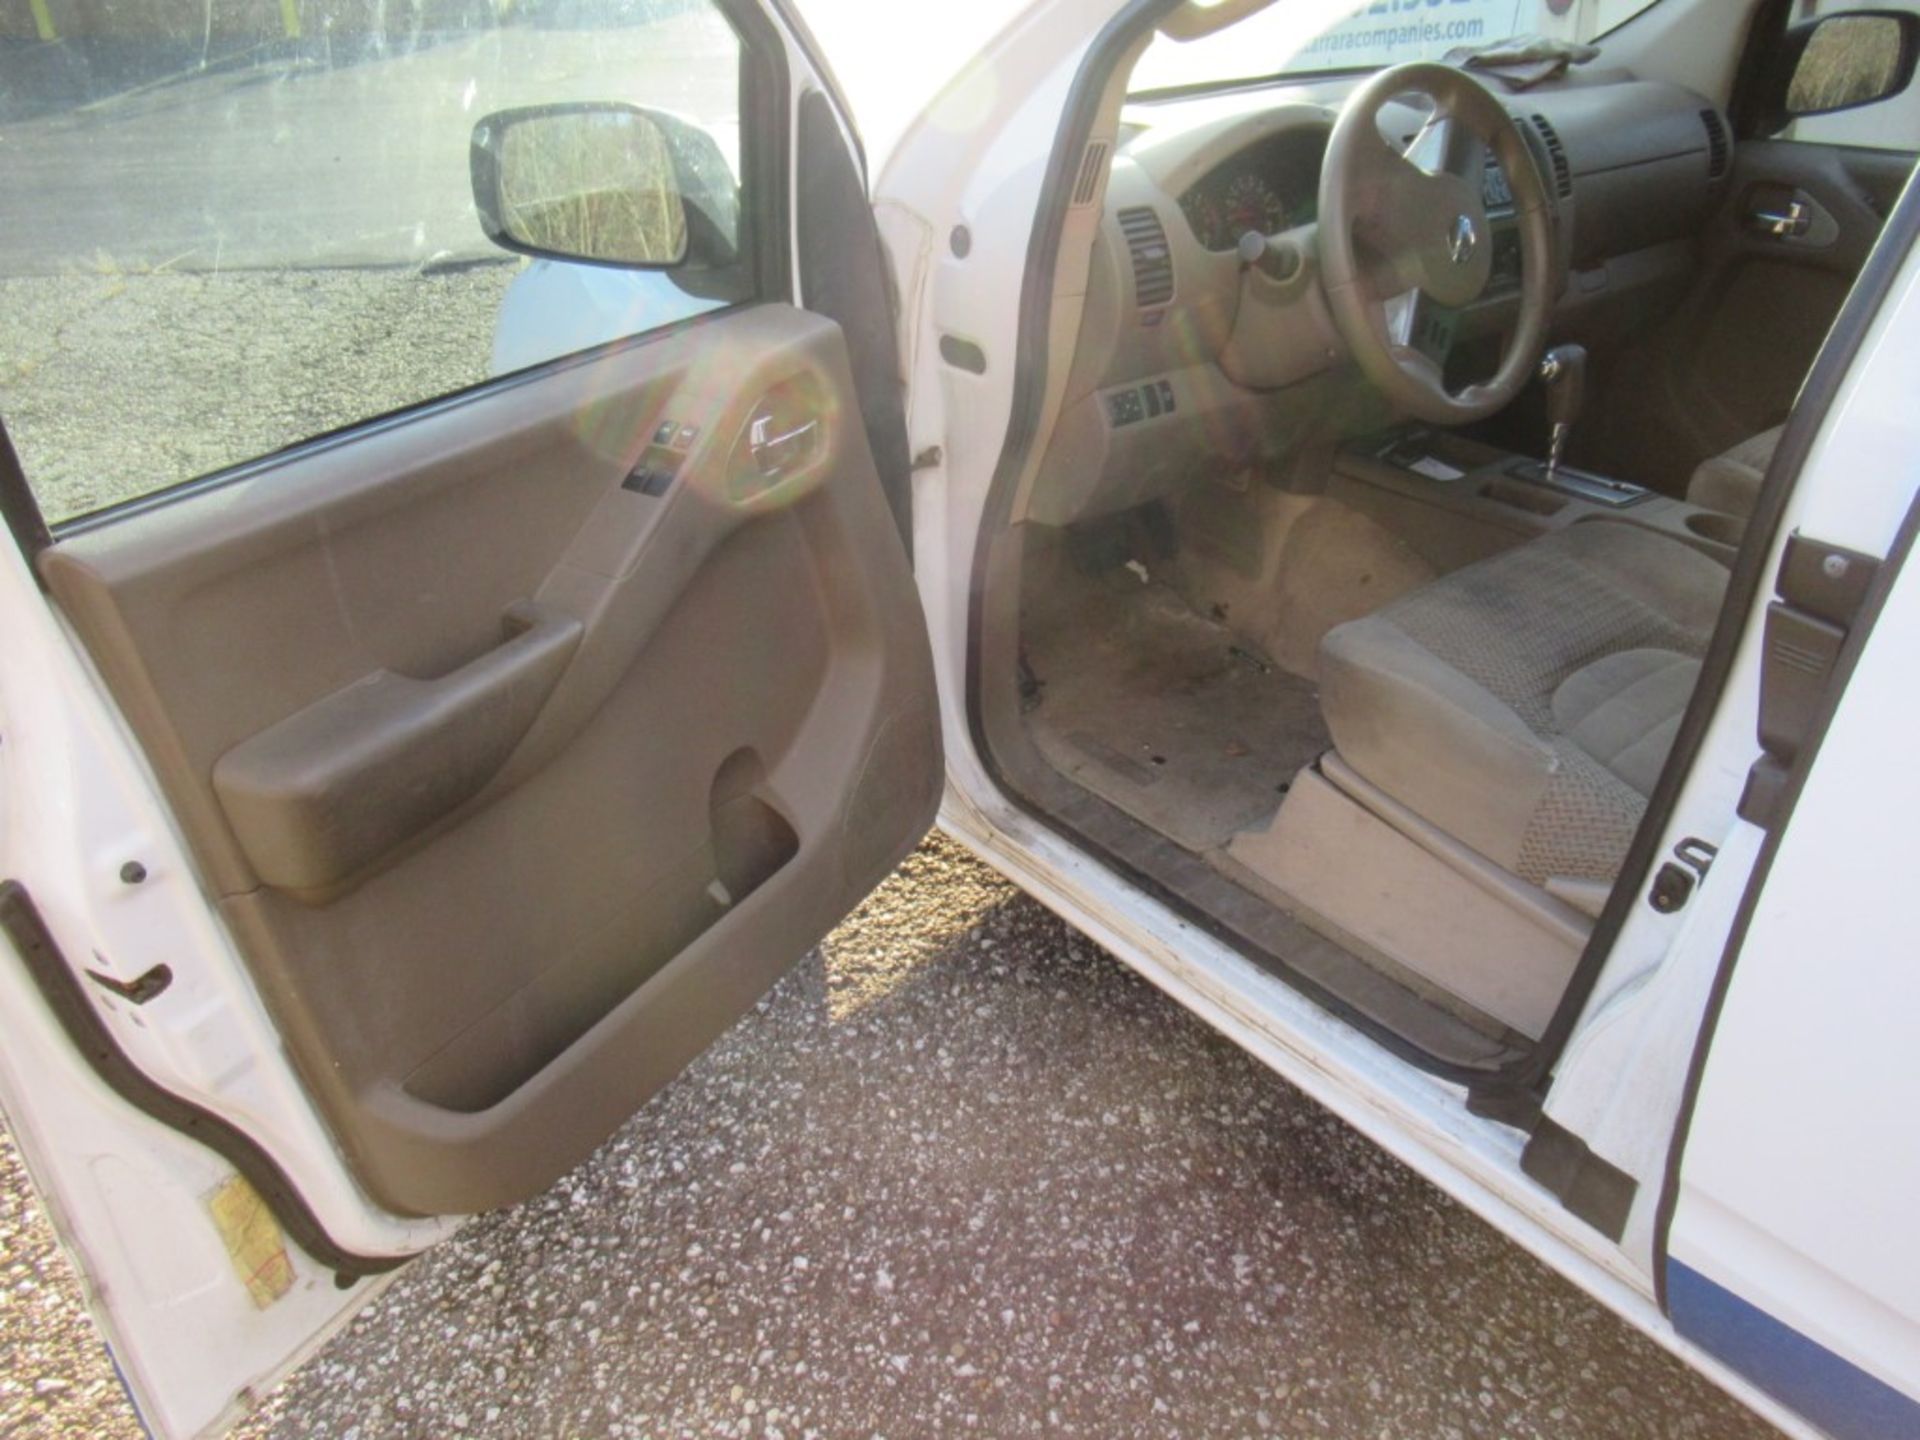 Wrecked 2005 Nissan Frontier Pickup, VIN 1NGAD06U05C427927, Extended Cab, Automatic, Cruise Control, - Image 14 of 20